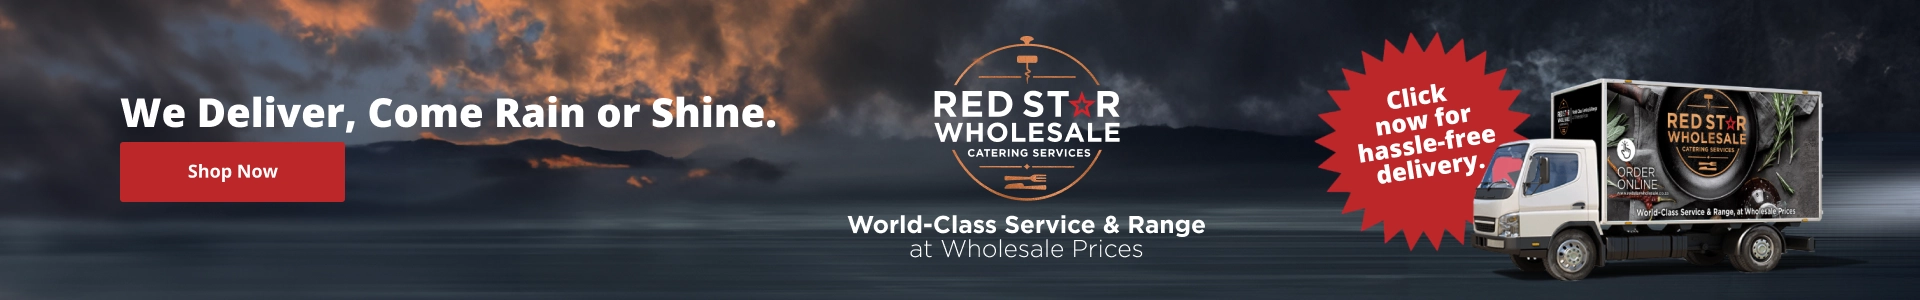 REDSTAR WHOLESALE DELIVERY